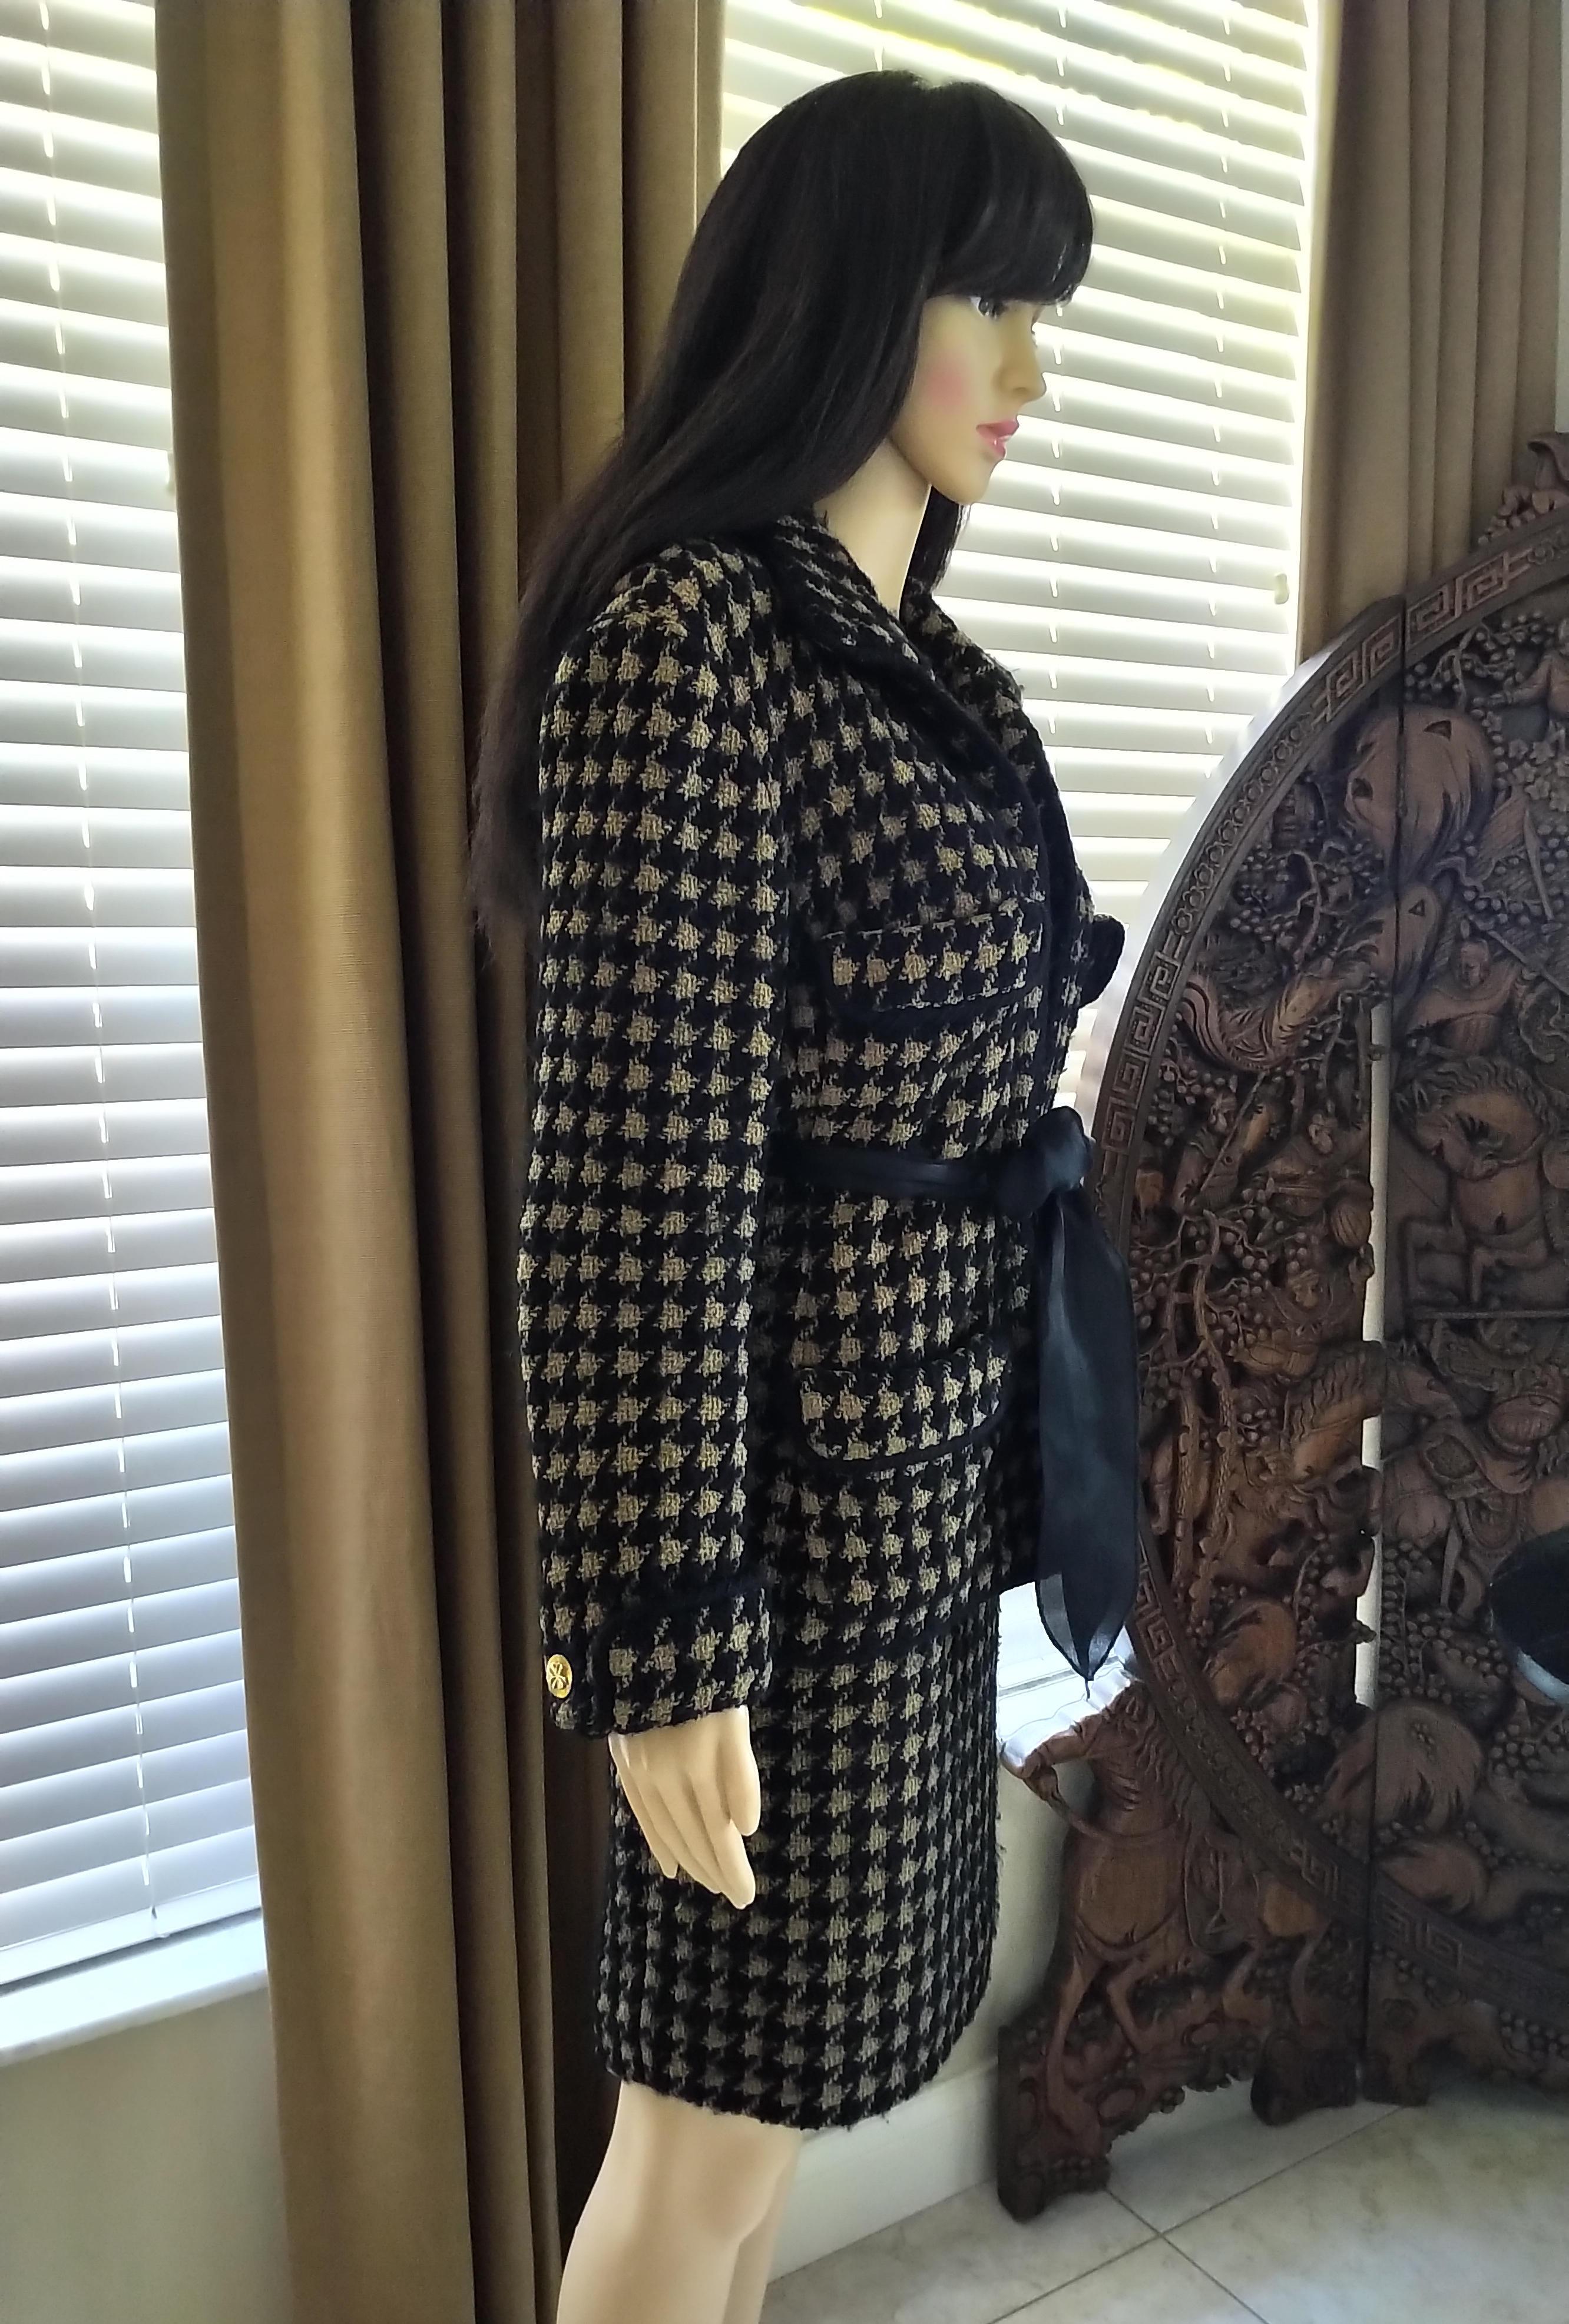 Vintage Chanel 1990's Black & Tan Fantasy Tweed Jacket Skirt Suit FR 40/ US 8 In Good Condition For Sale In Ormond Beach, FL